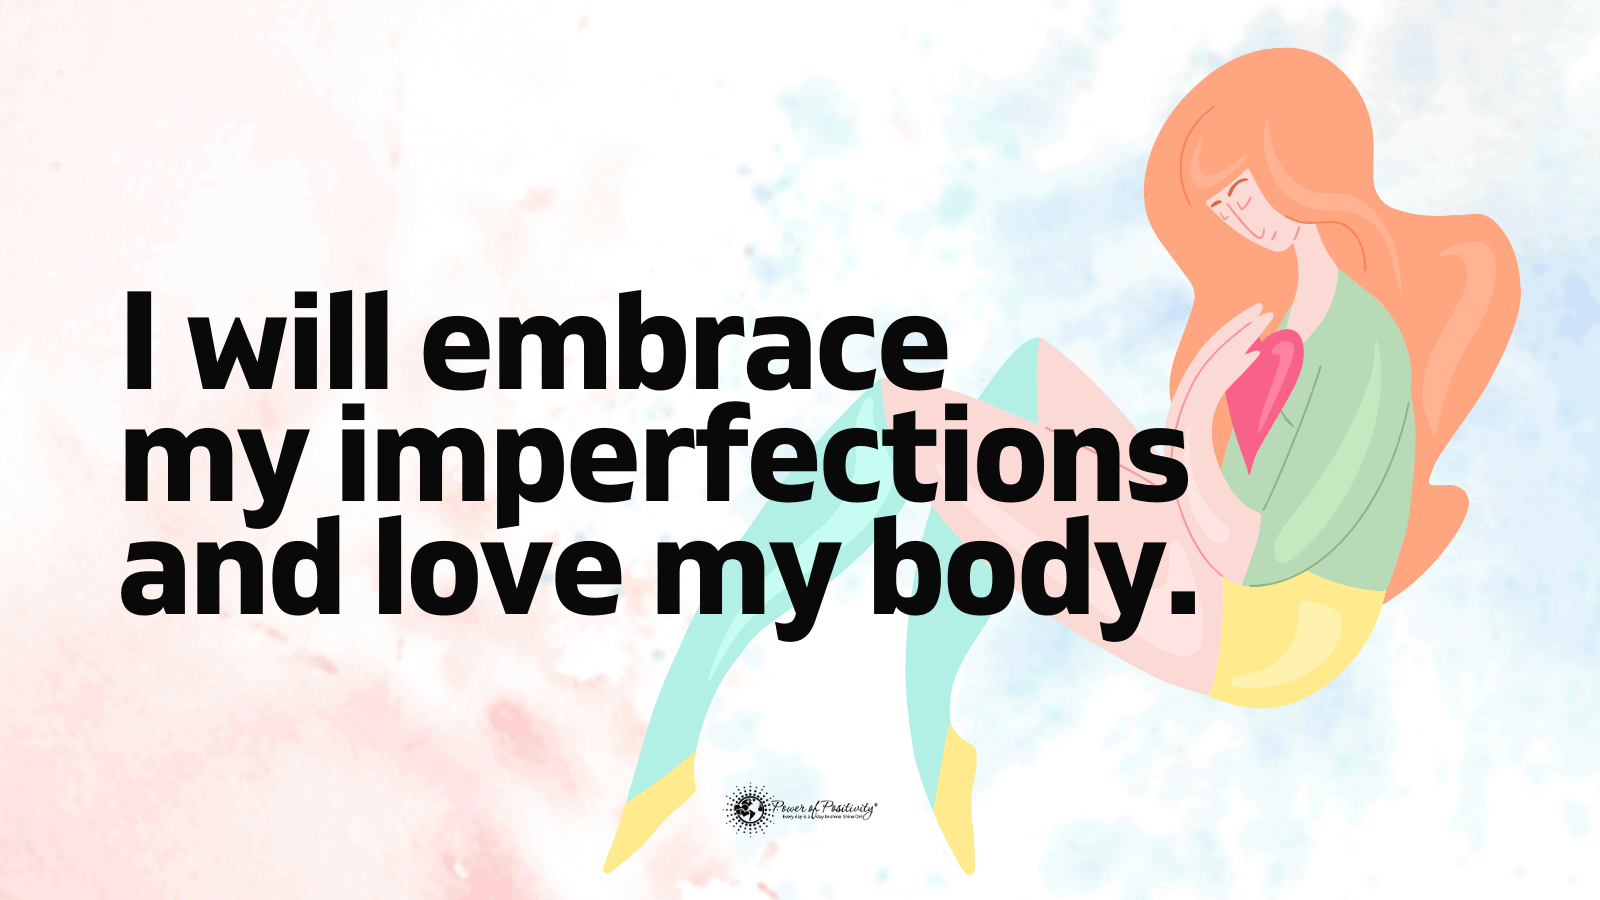 20 Positive Affirmations to Make You More Comfortable in Your Own Skin